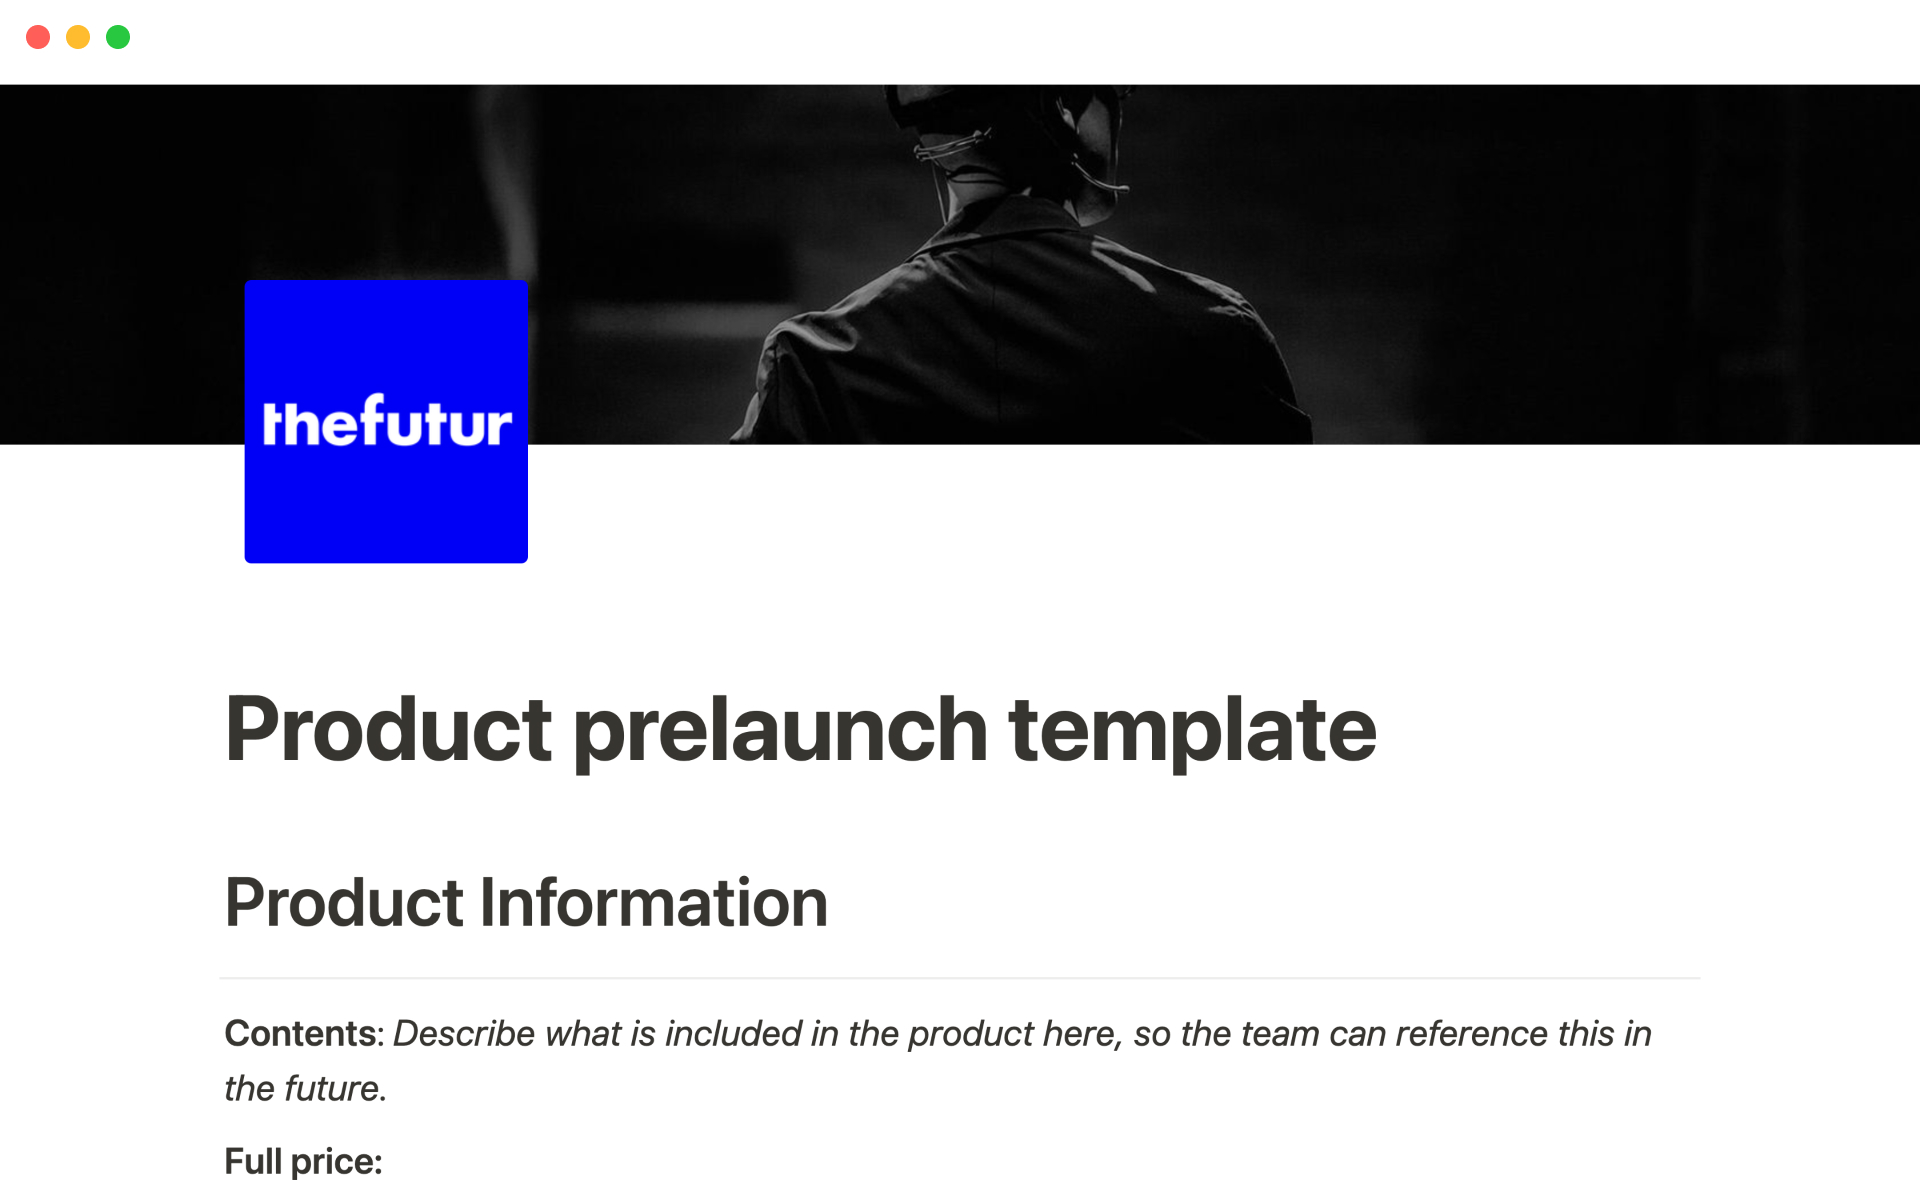 The team at The Futur uses this template to prelaunch digital products.